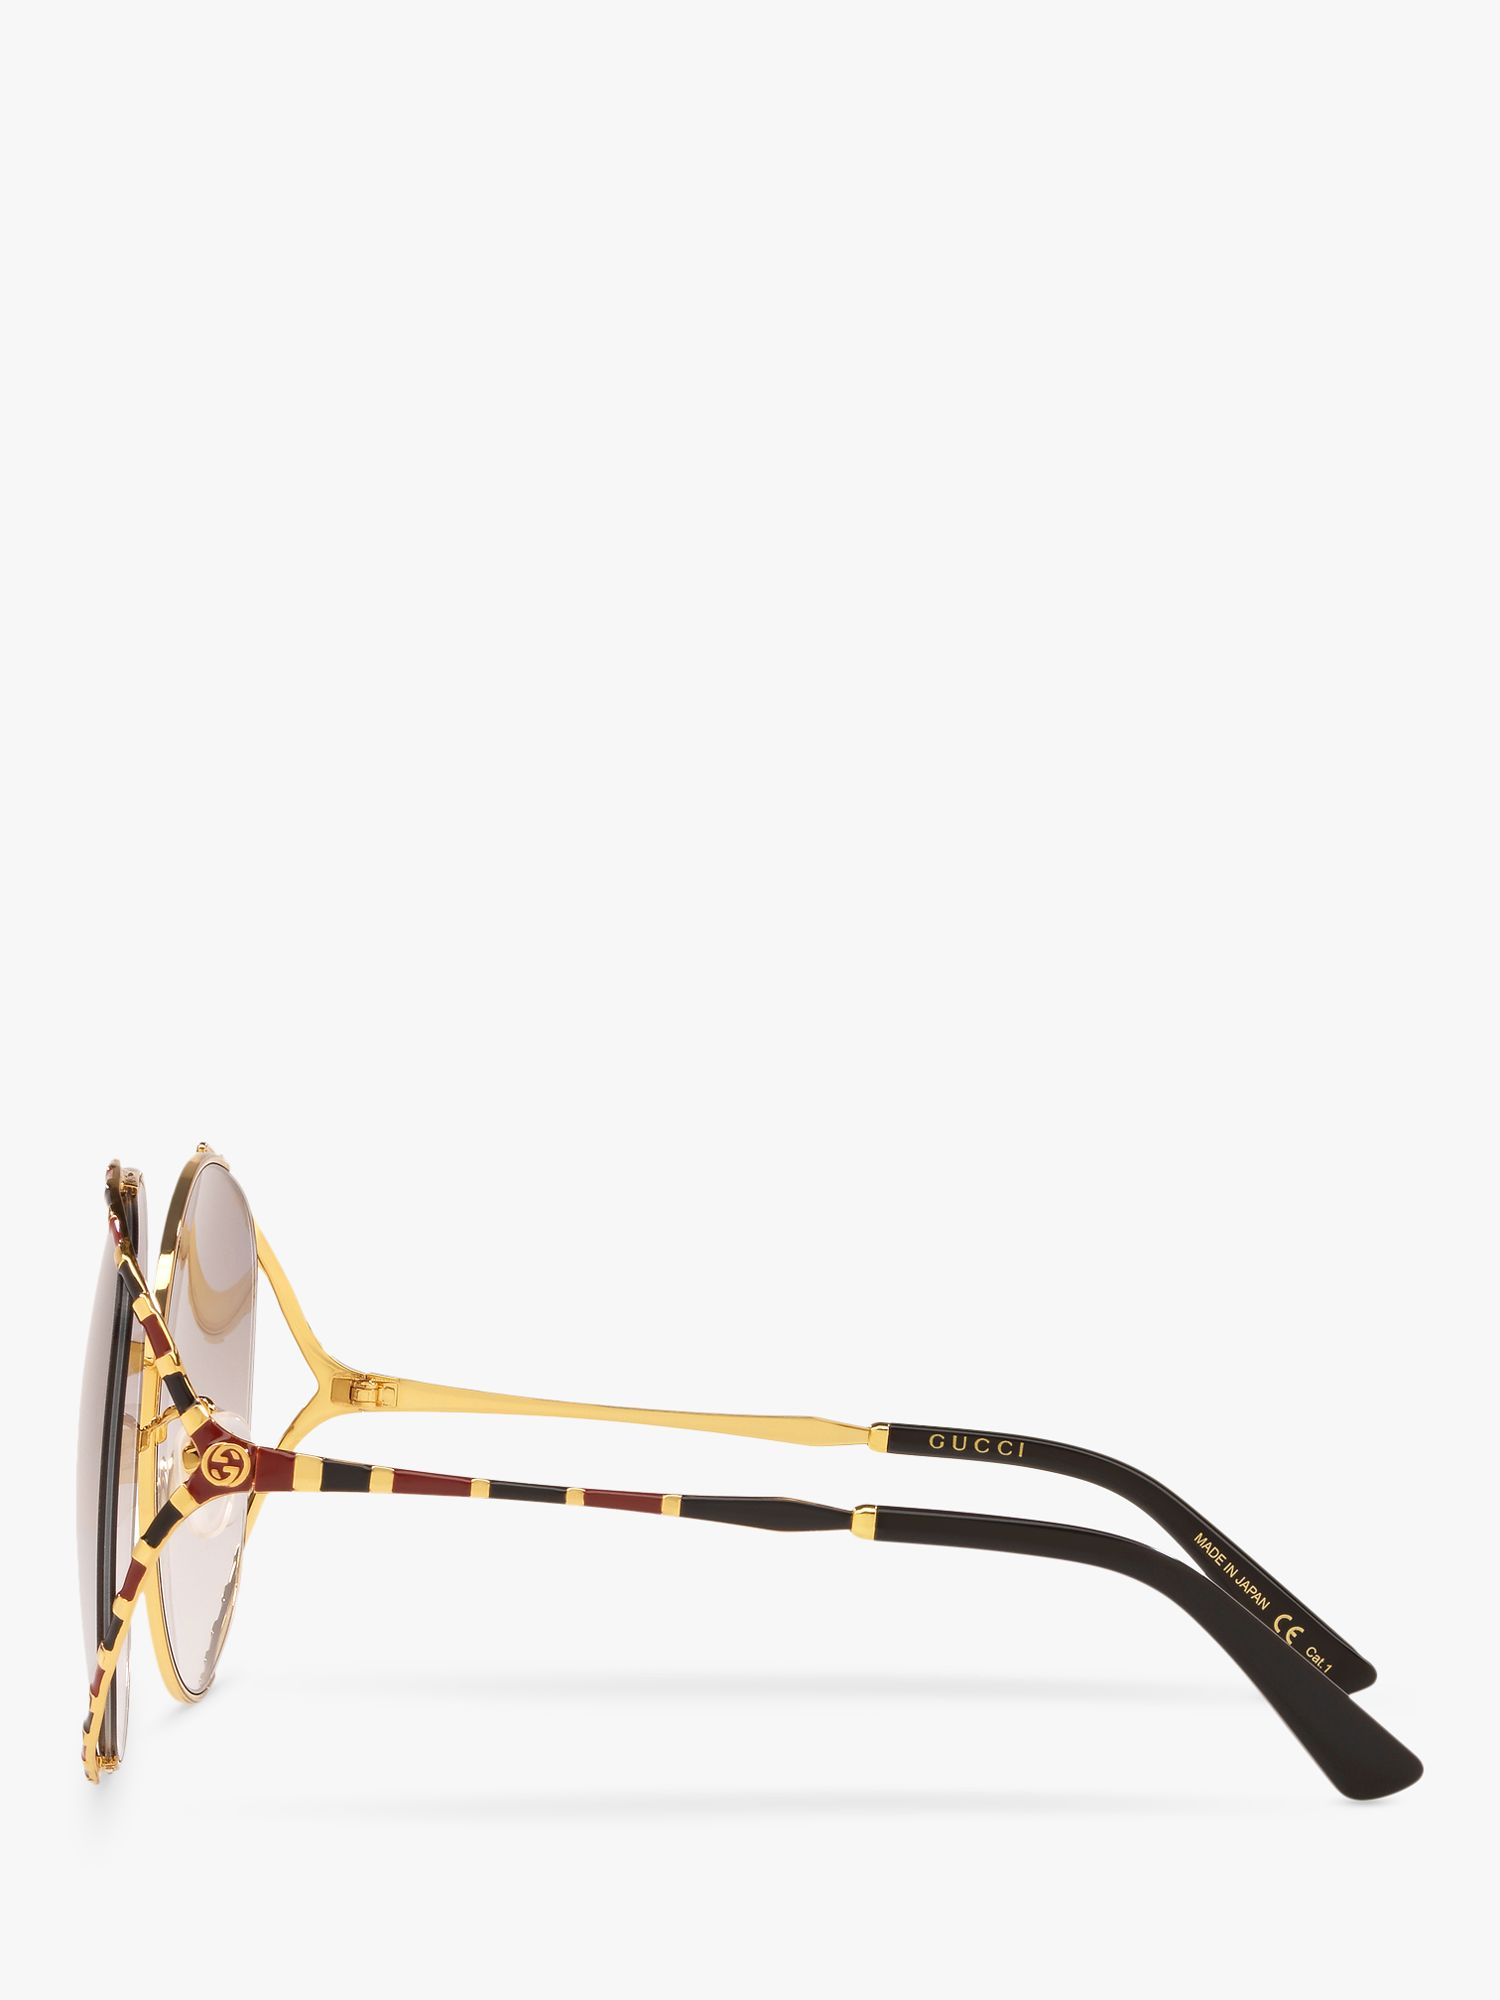 Gucci GG0595S Women's Oversized Oval Sunglasses, Gold/Beige Gradient at ...